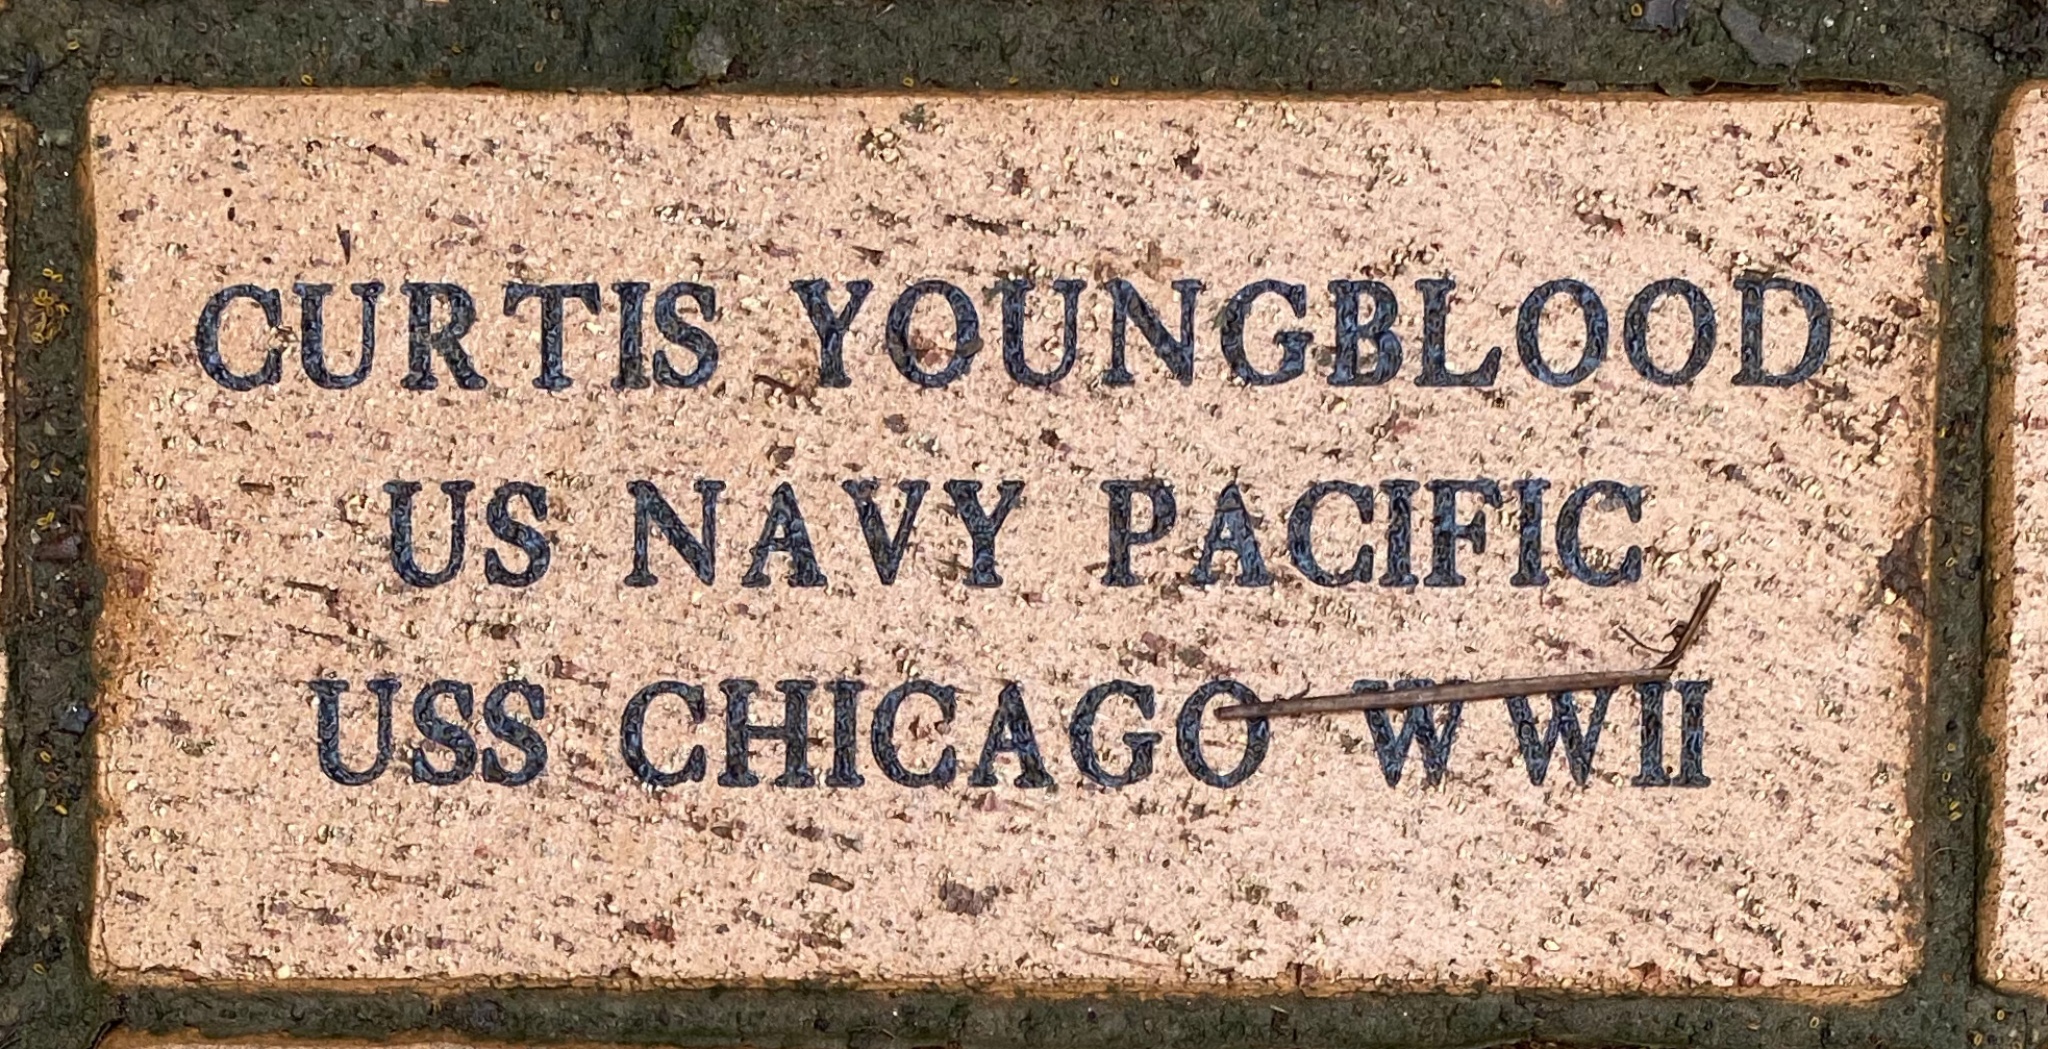 CURTIS YOUNGBLOOD US NAVY PACIFIC USS CHICAGO WWII